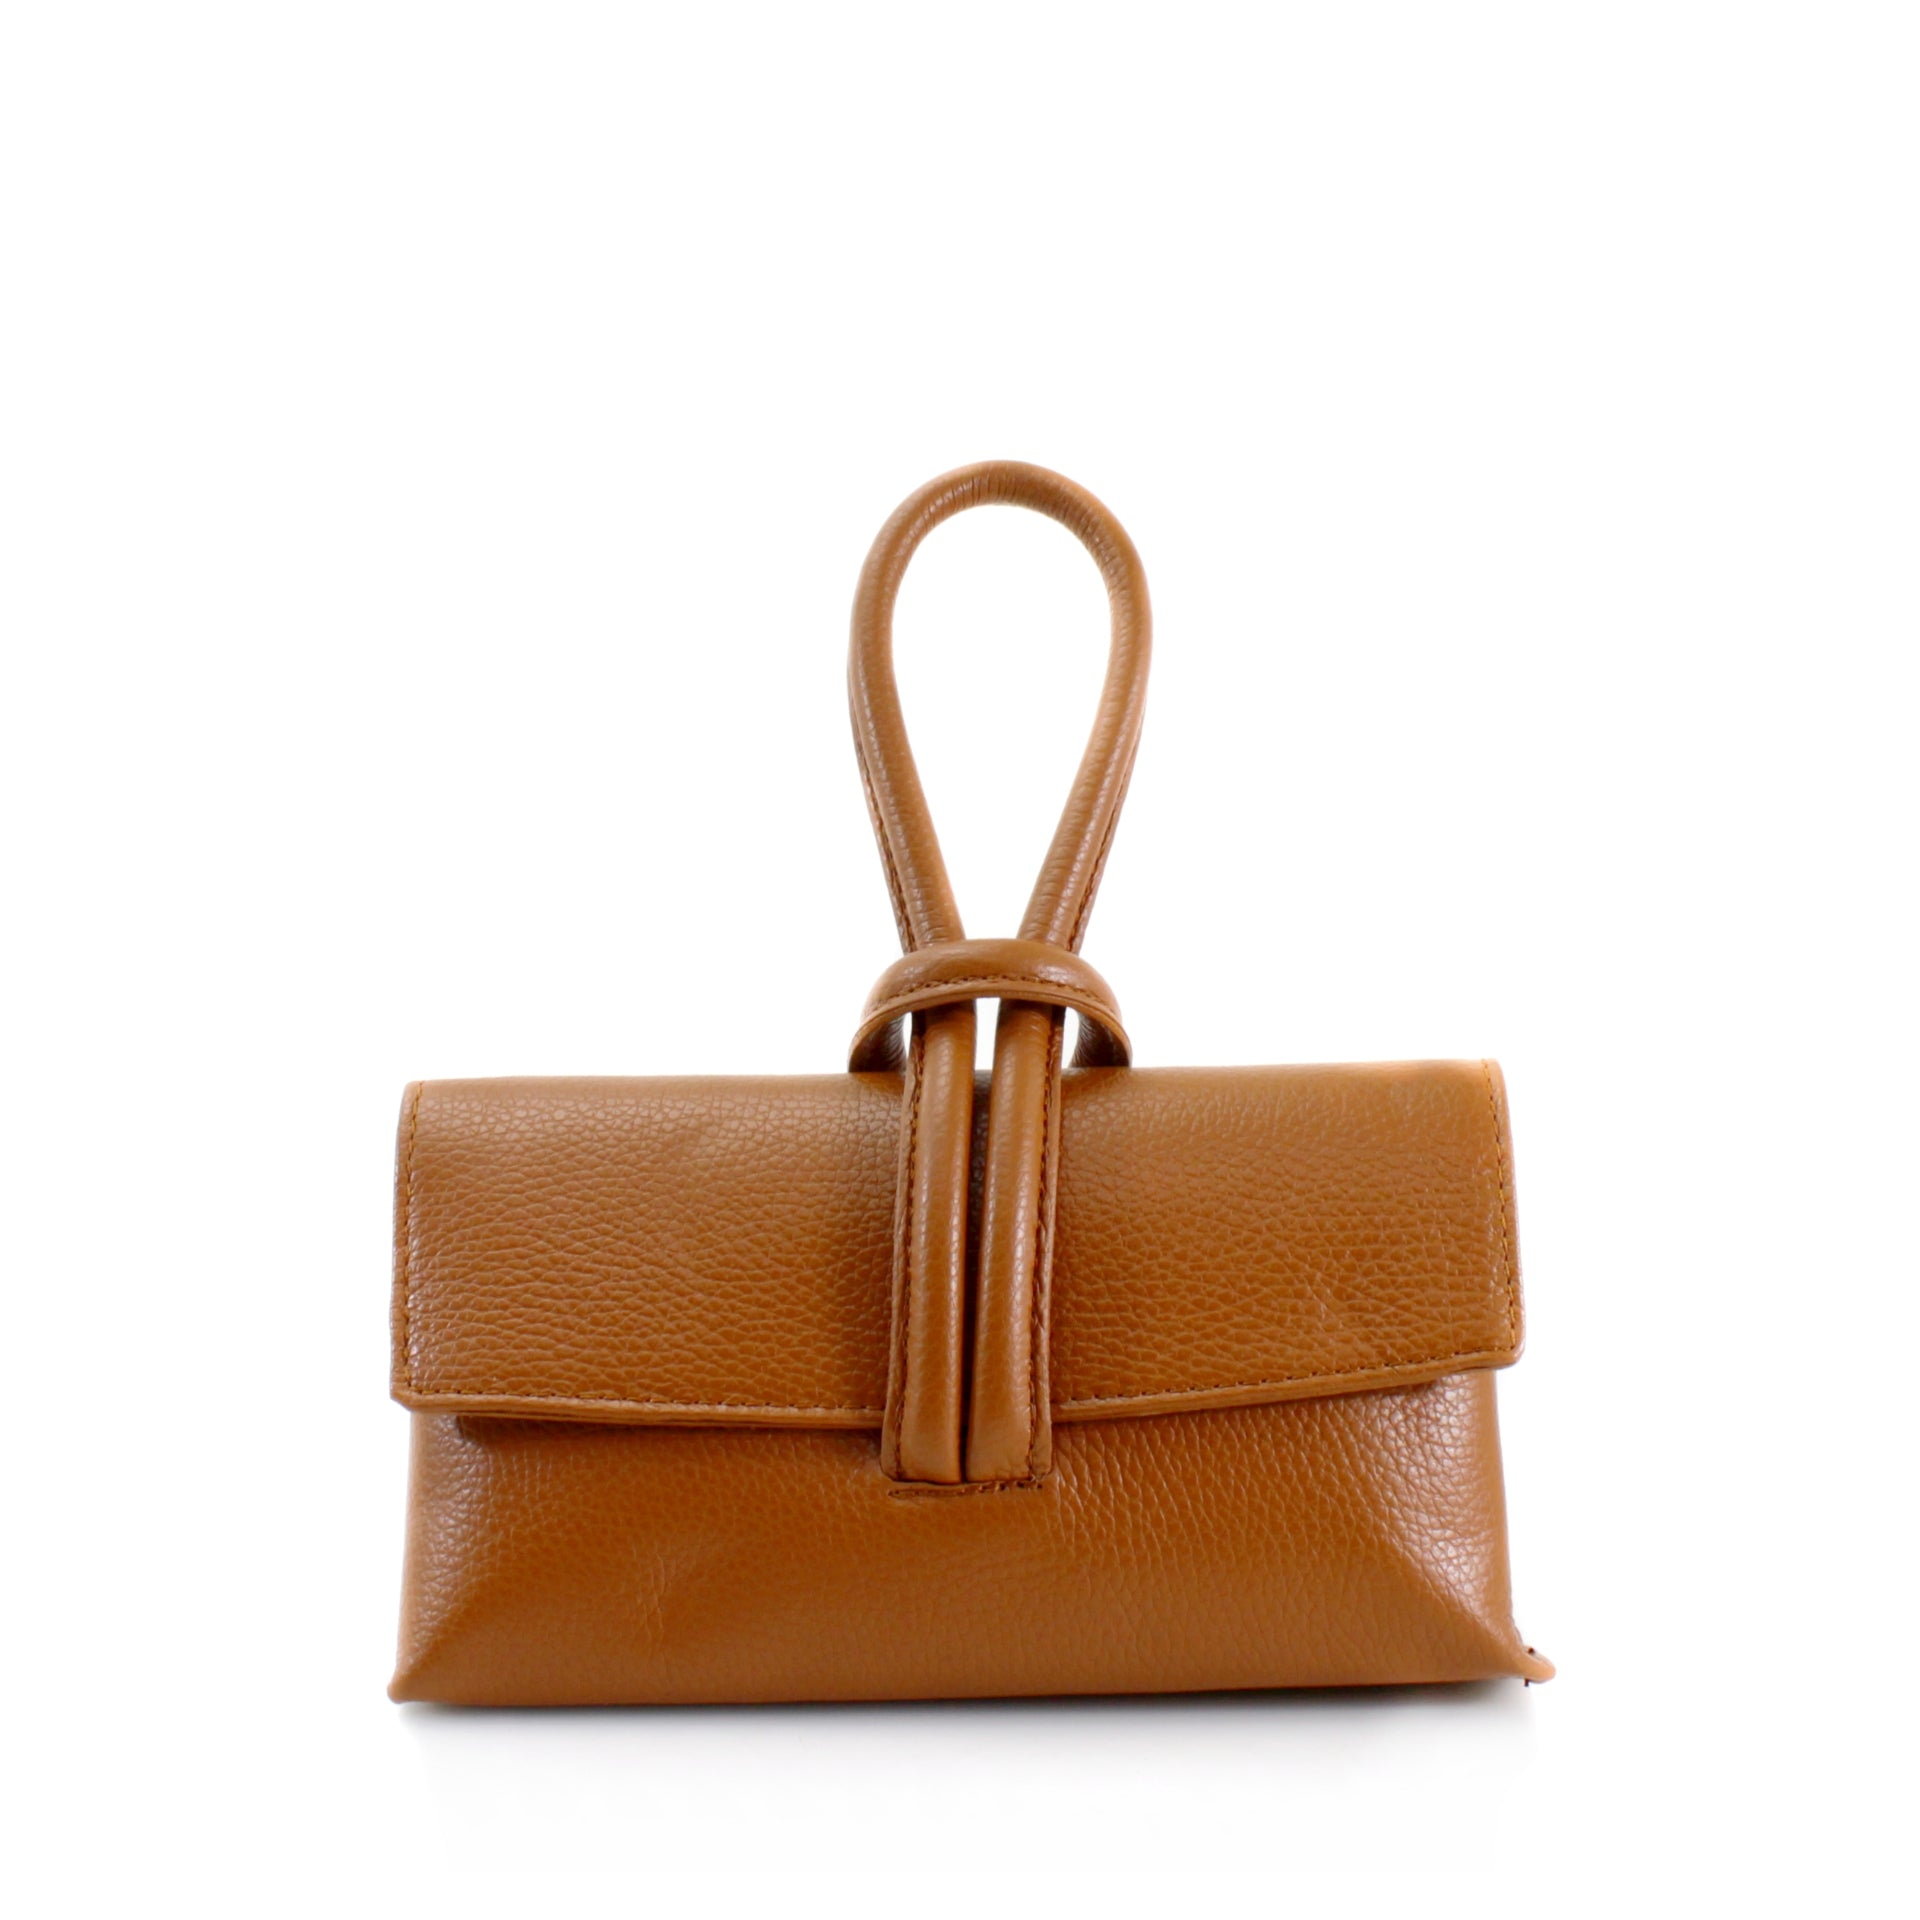 Chic & Sassy Brown Leather Clutch Bag